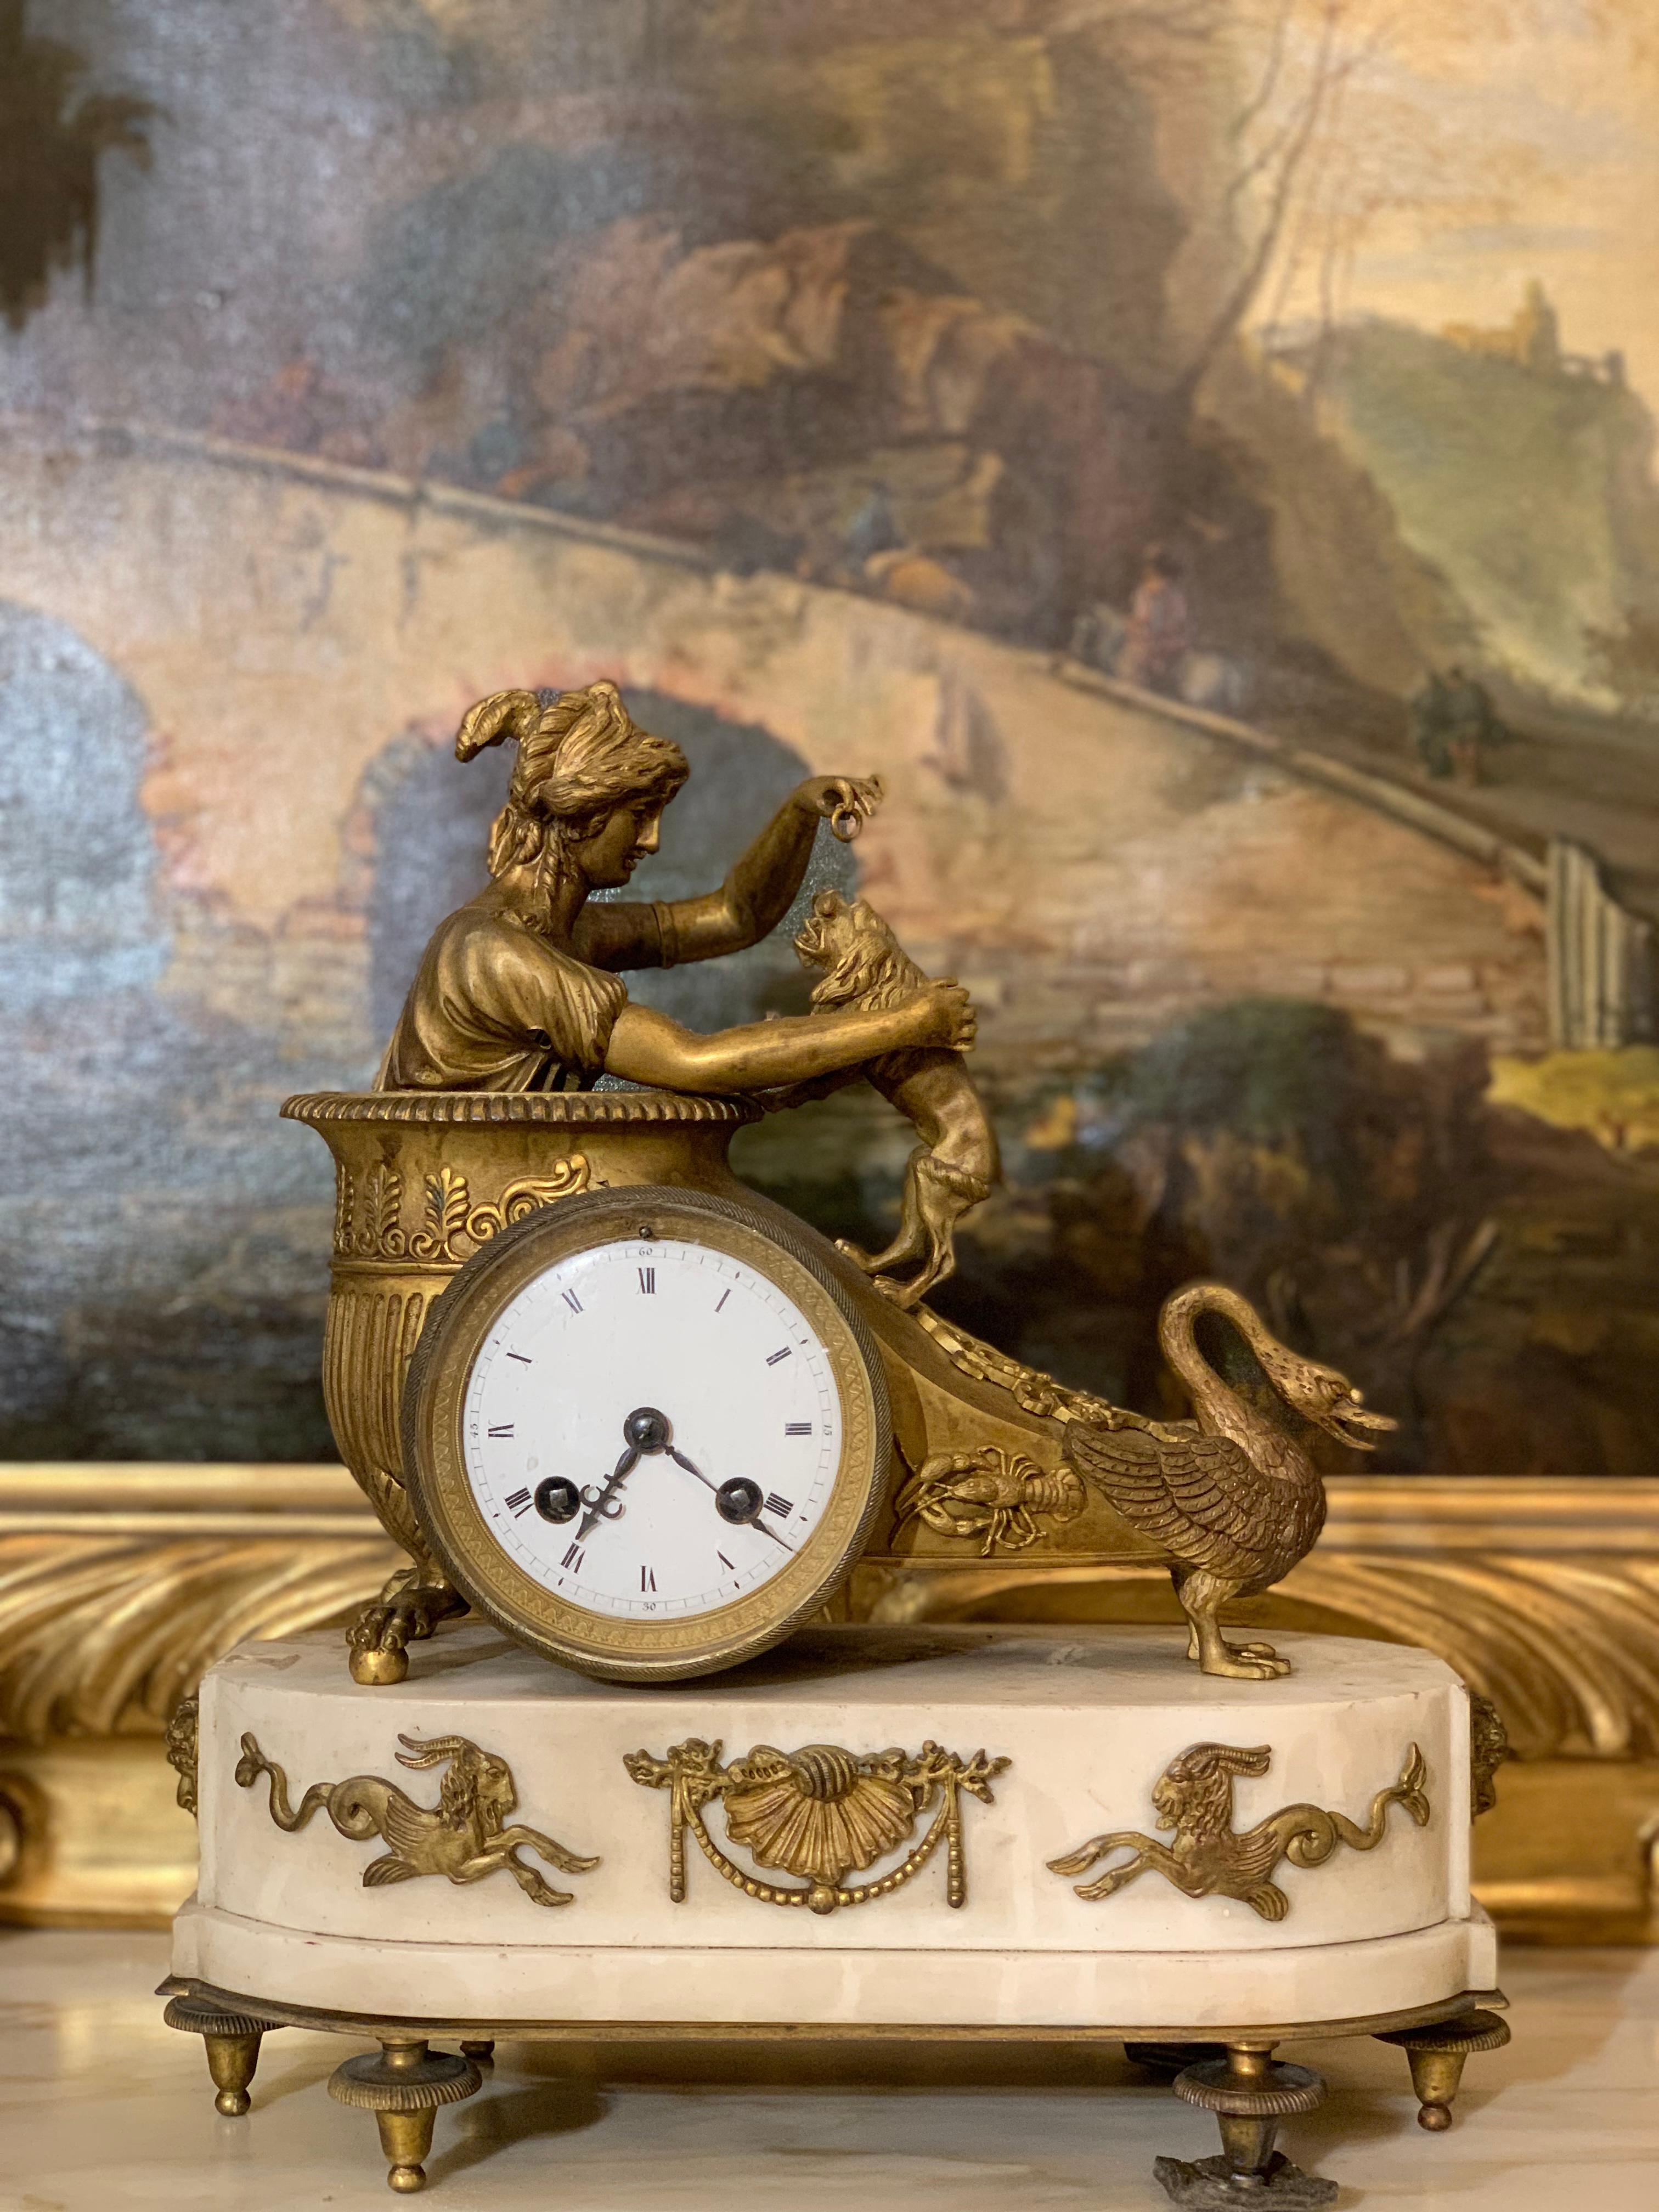 Neoclassical Revival 18th CENTURY NEOCLASSIC CLOCK WITH CHARIOT For Sale